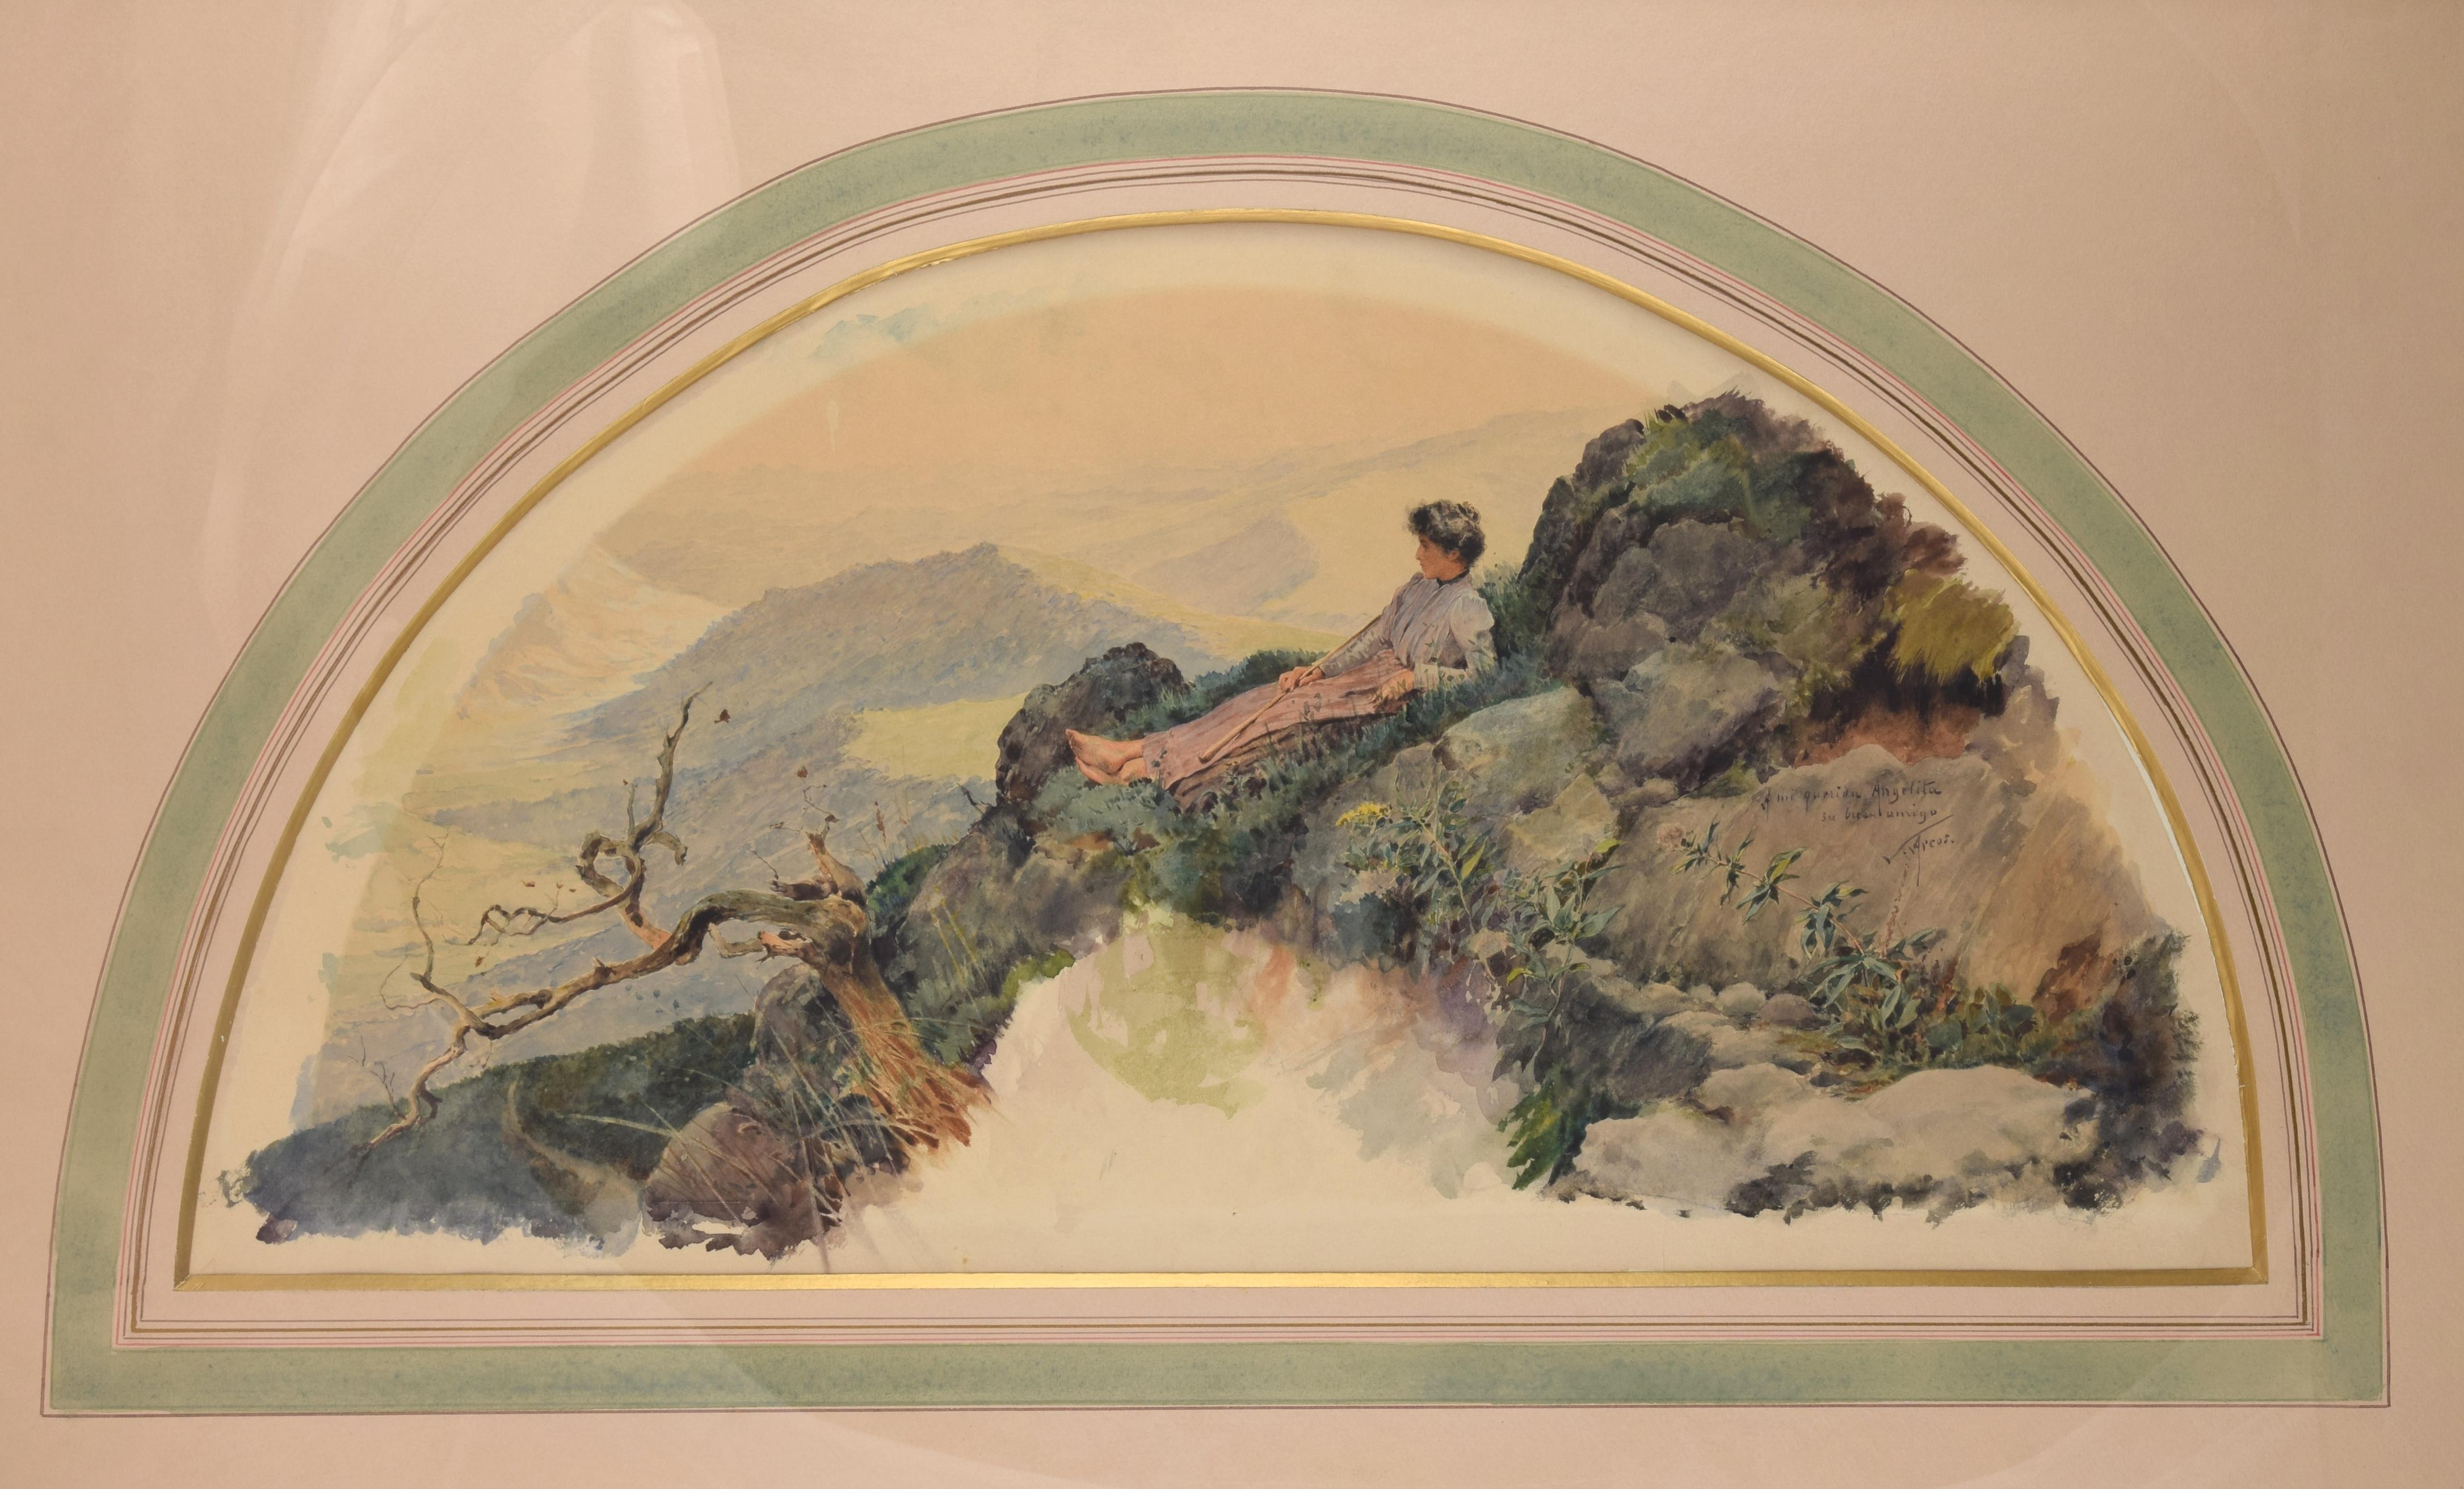 Lady in landscape. Watercolor. Dedicated and signed in the right area. ARCOS Y MEGALDE, Santiago (Santiago, Chile, 1865- San Sebastián ?, 1912).
Watercolor arranged in the shape of a fan country that shows a high mountain landscape contemplated by